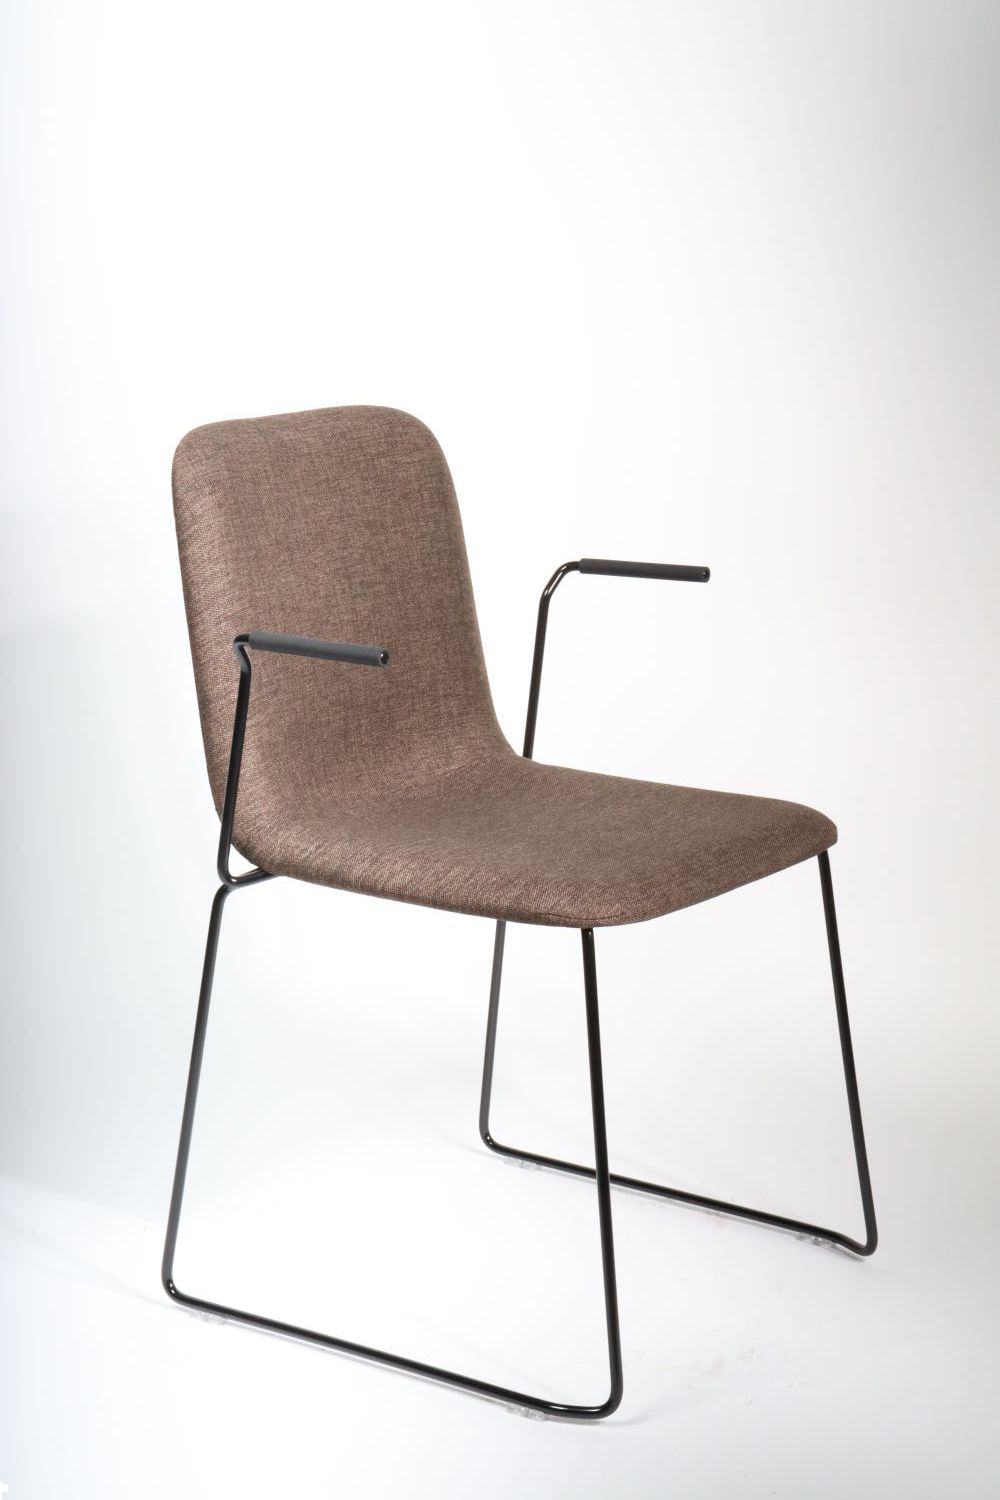 this 142 chair